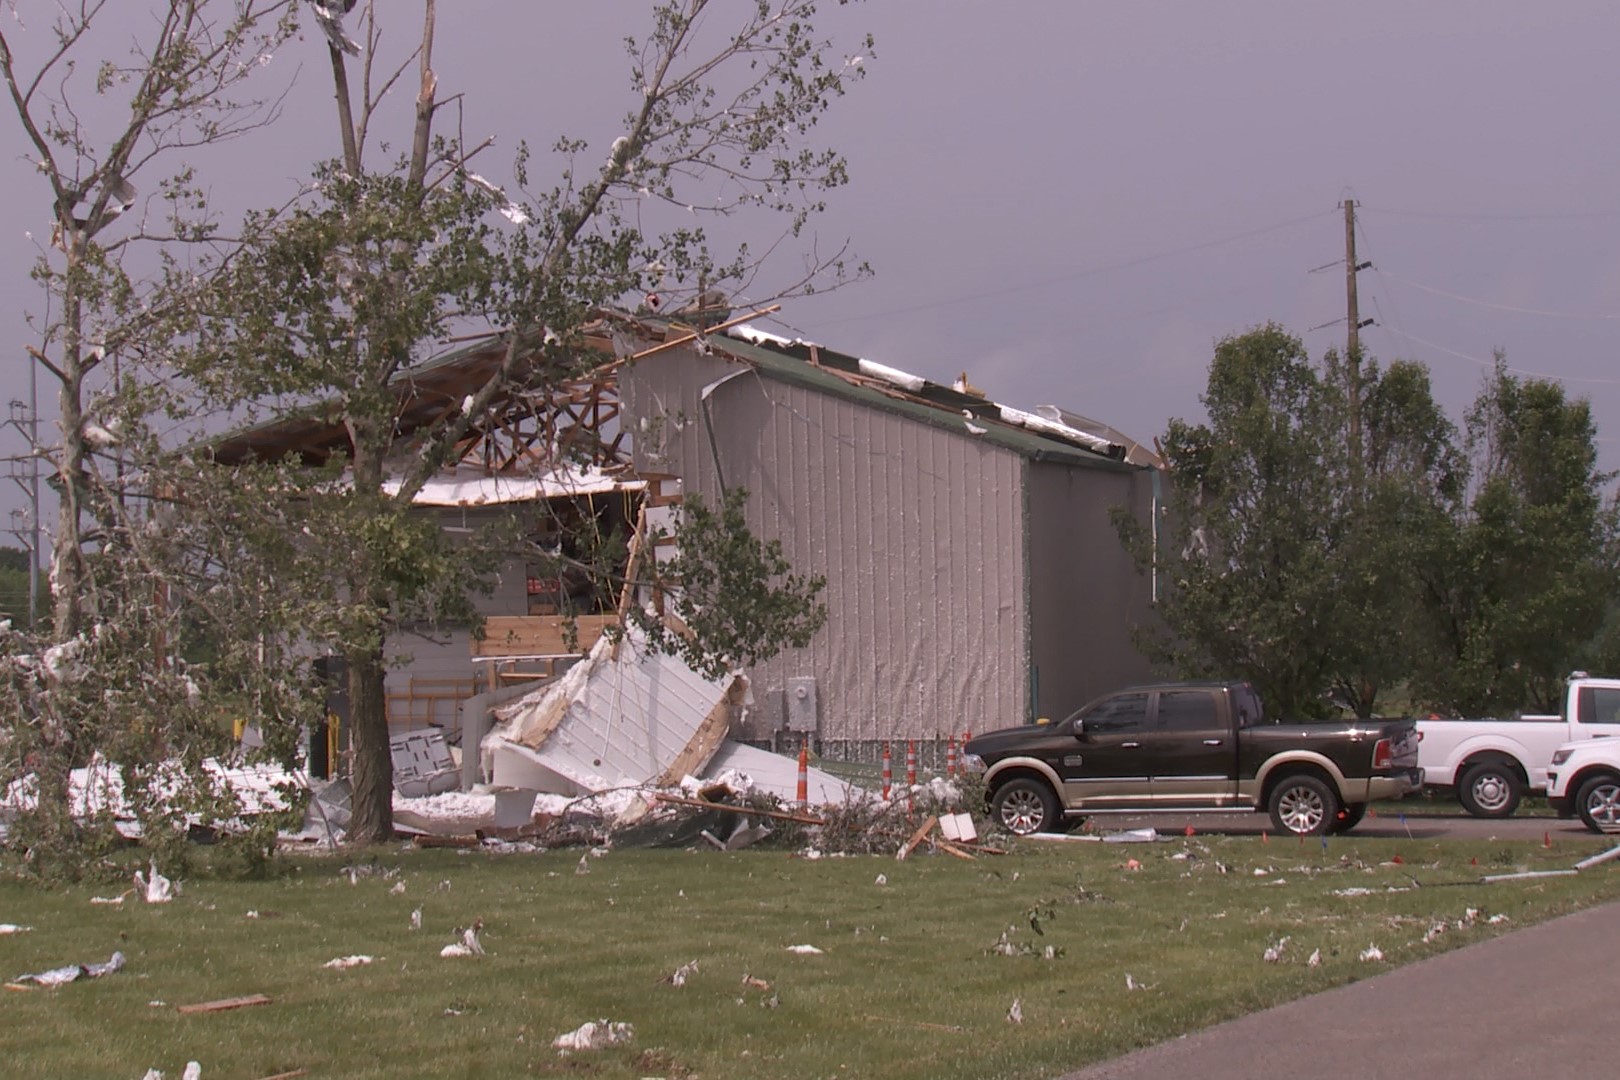 Damage to a building in Ellettsville after storms in June 2019.